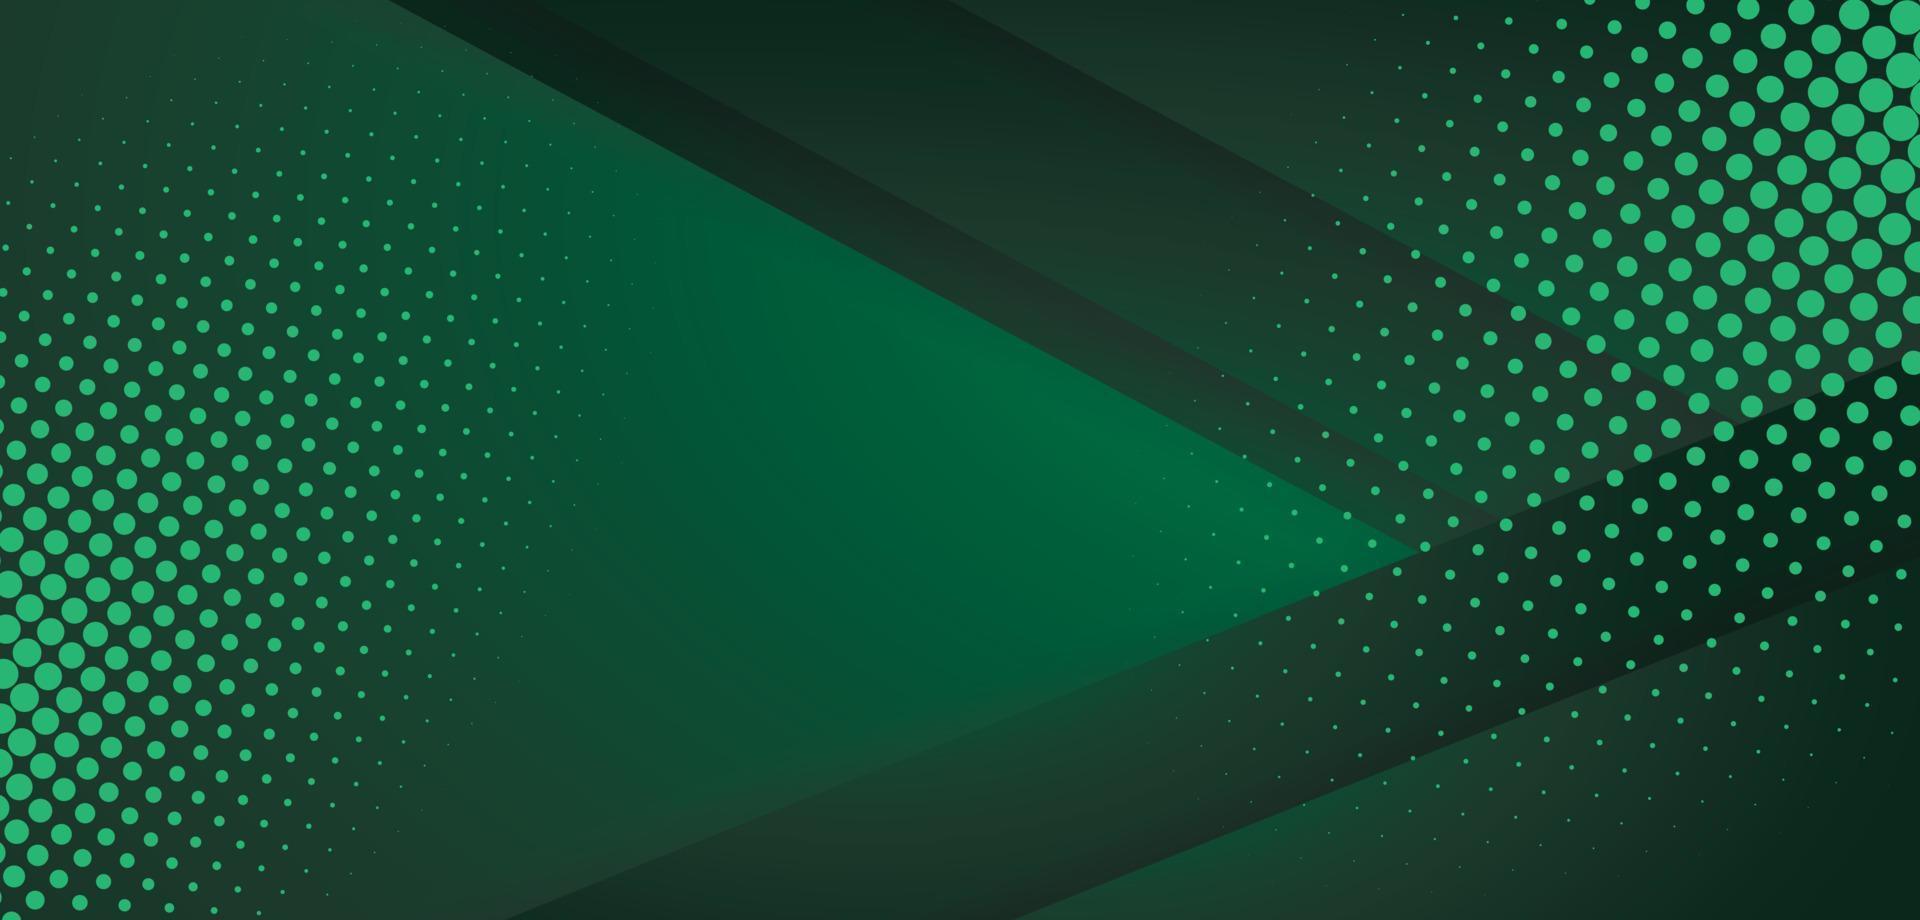 Green Background Abstract free design vector